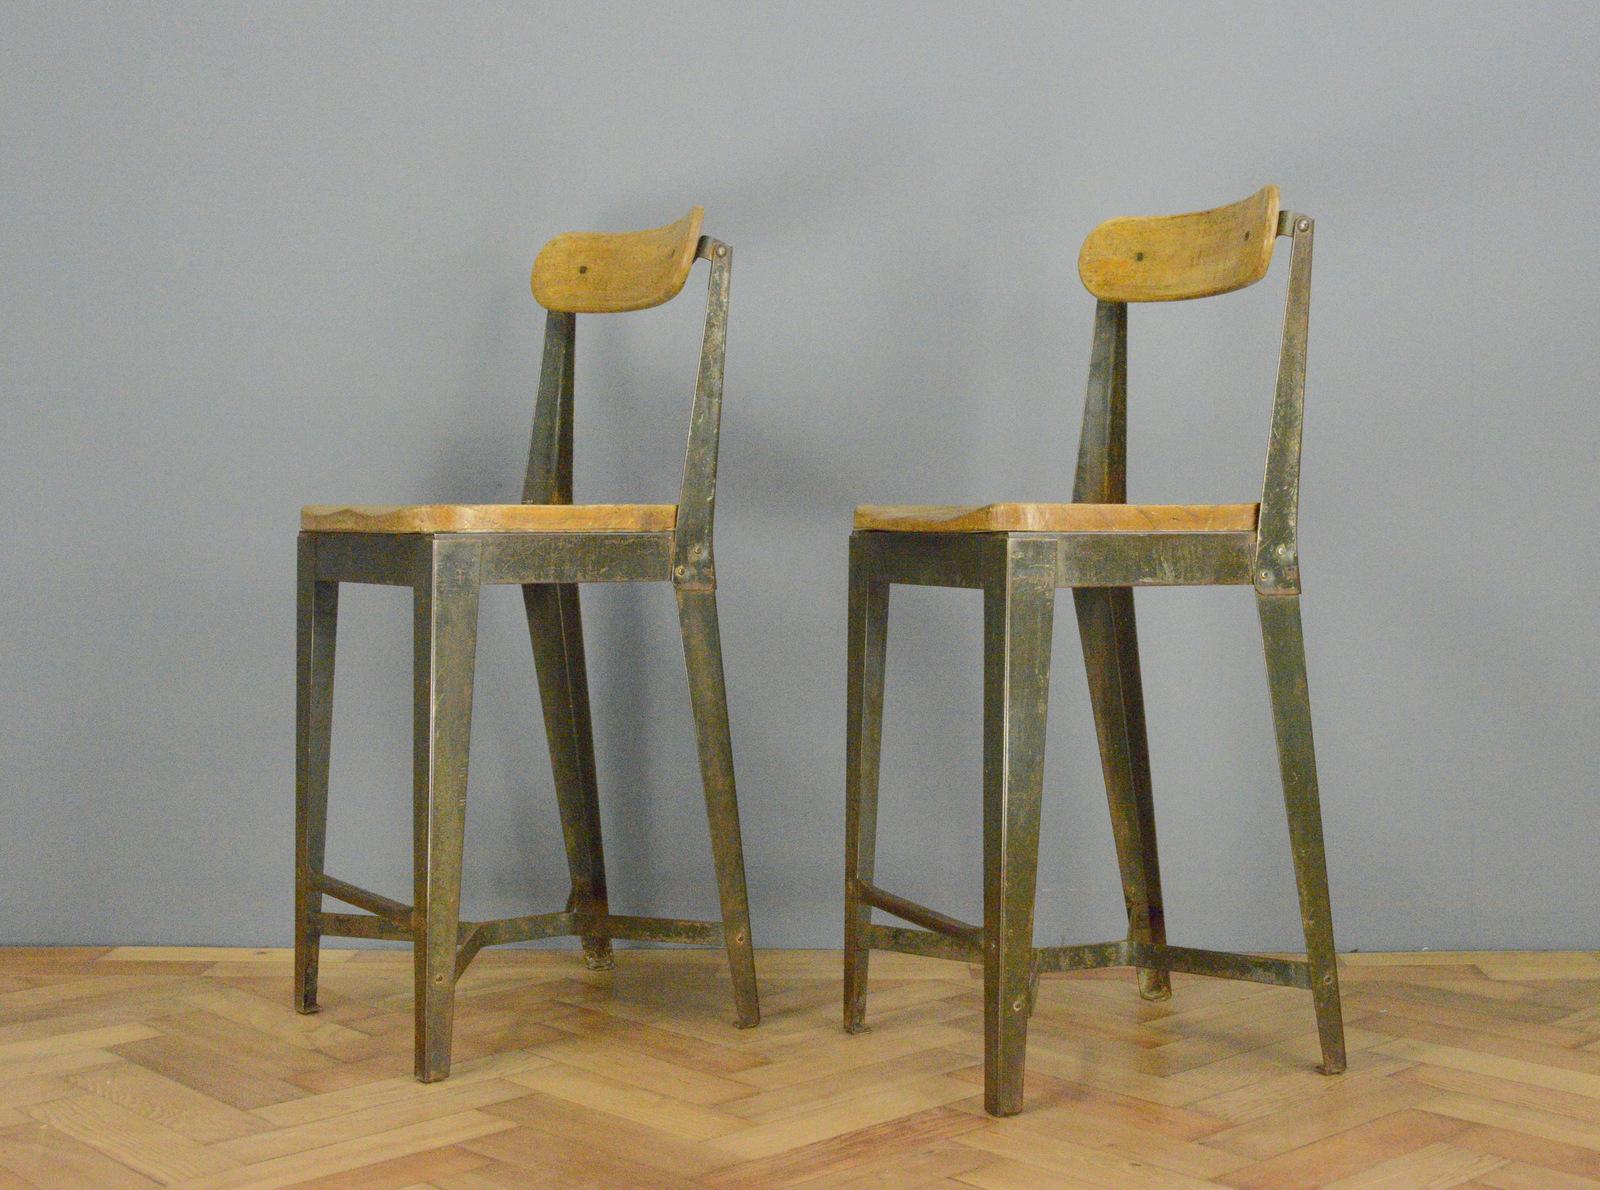 Industrial Factory Chairs By Leabank circa 1940s

- Steel frames
- Original solid Elm seats and back rests
- Original dark green paint
- Made by Leabank
- English ~ 1940s
- 37cm wide x 34cm deep x 88cm tall
- 56cm seat height

Condition